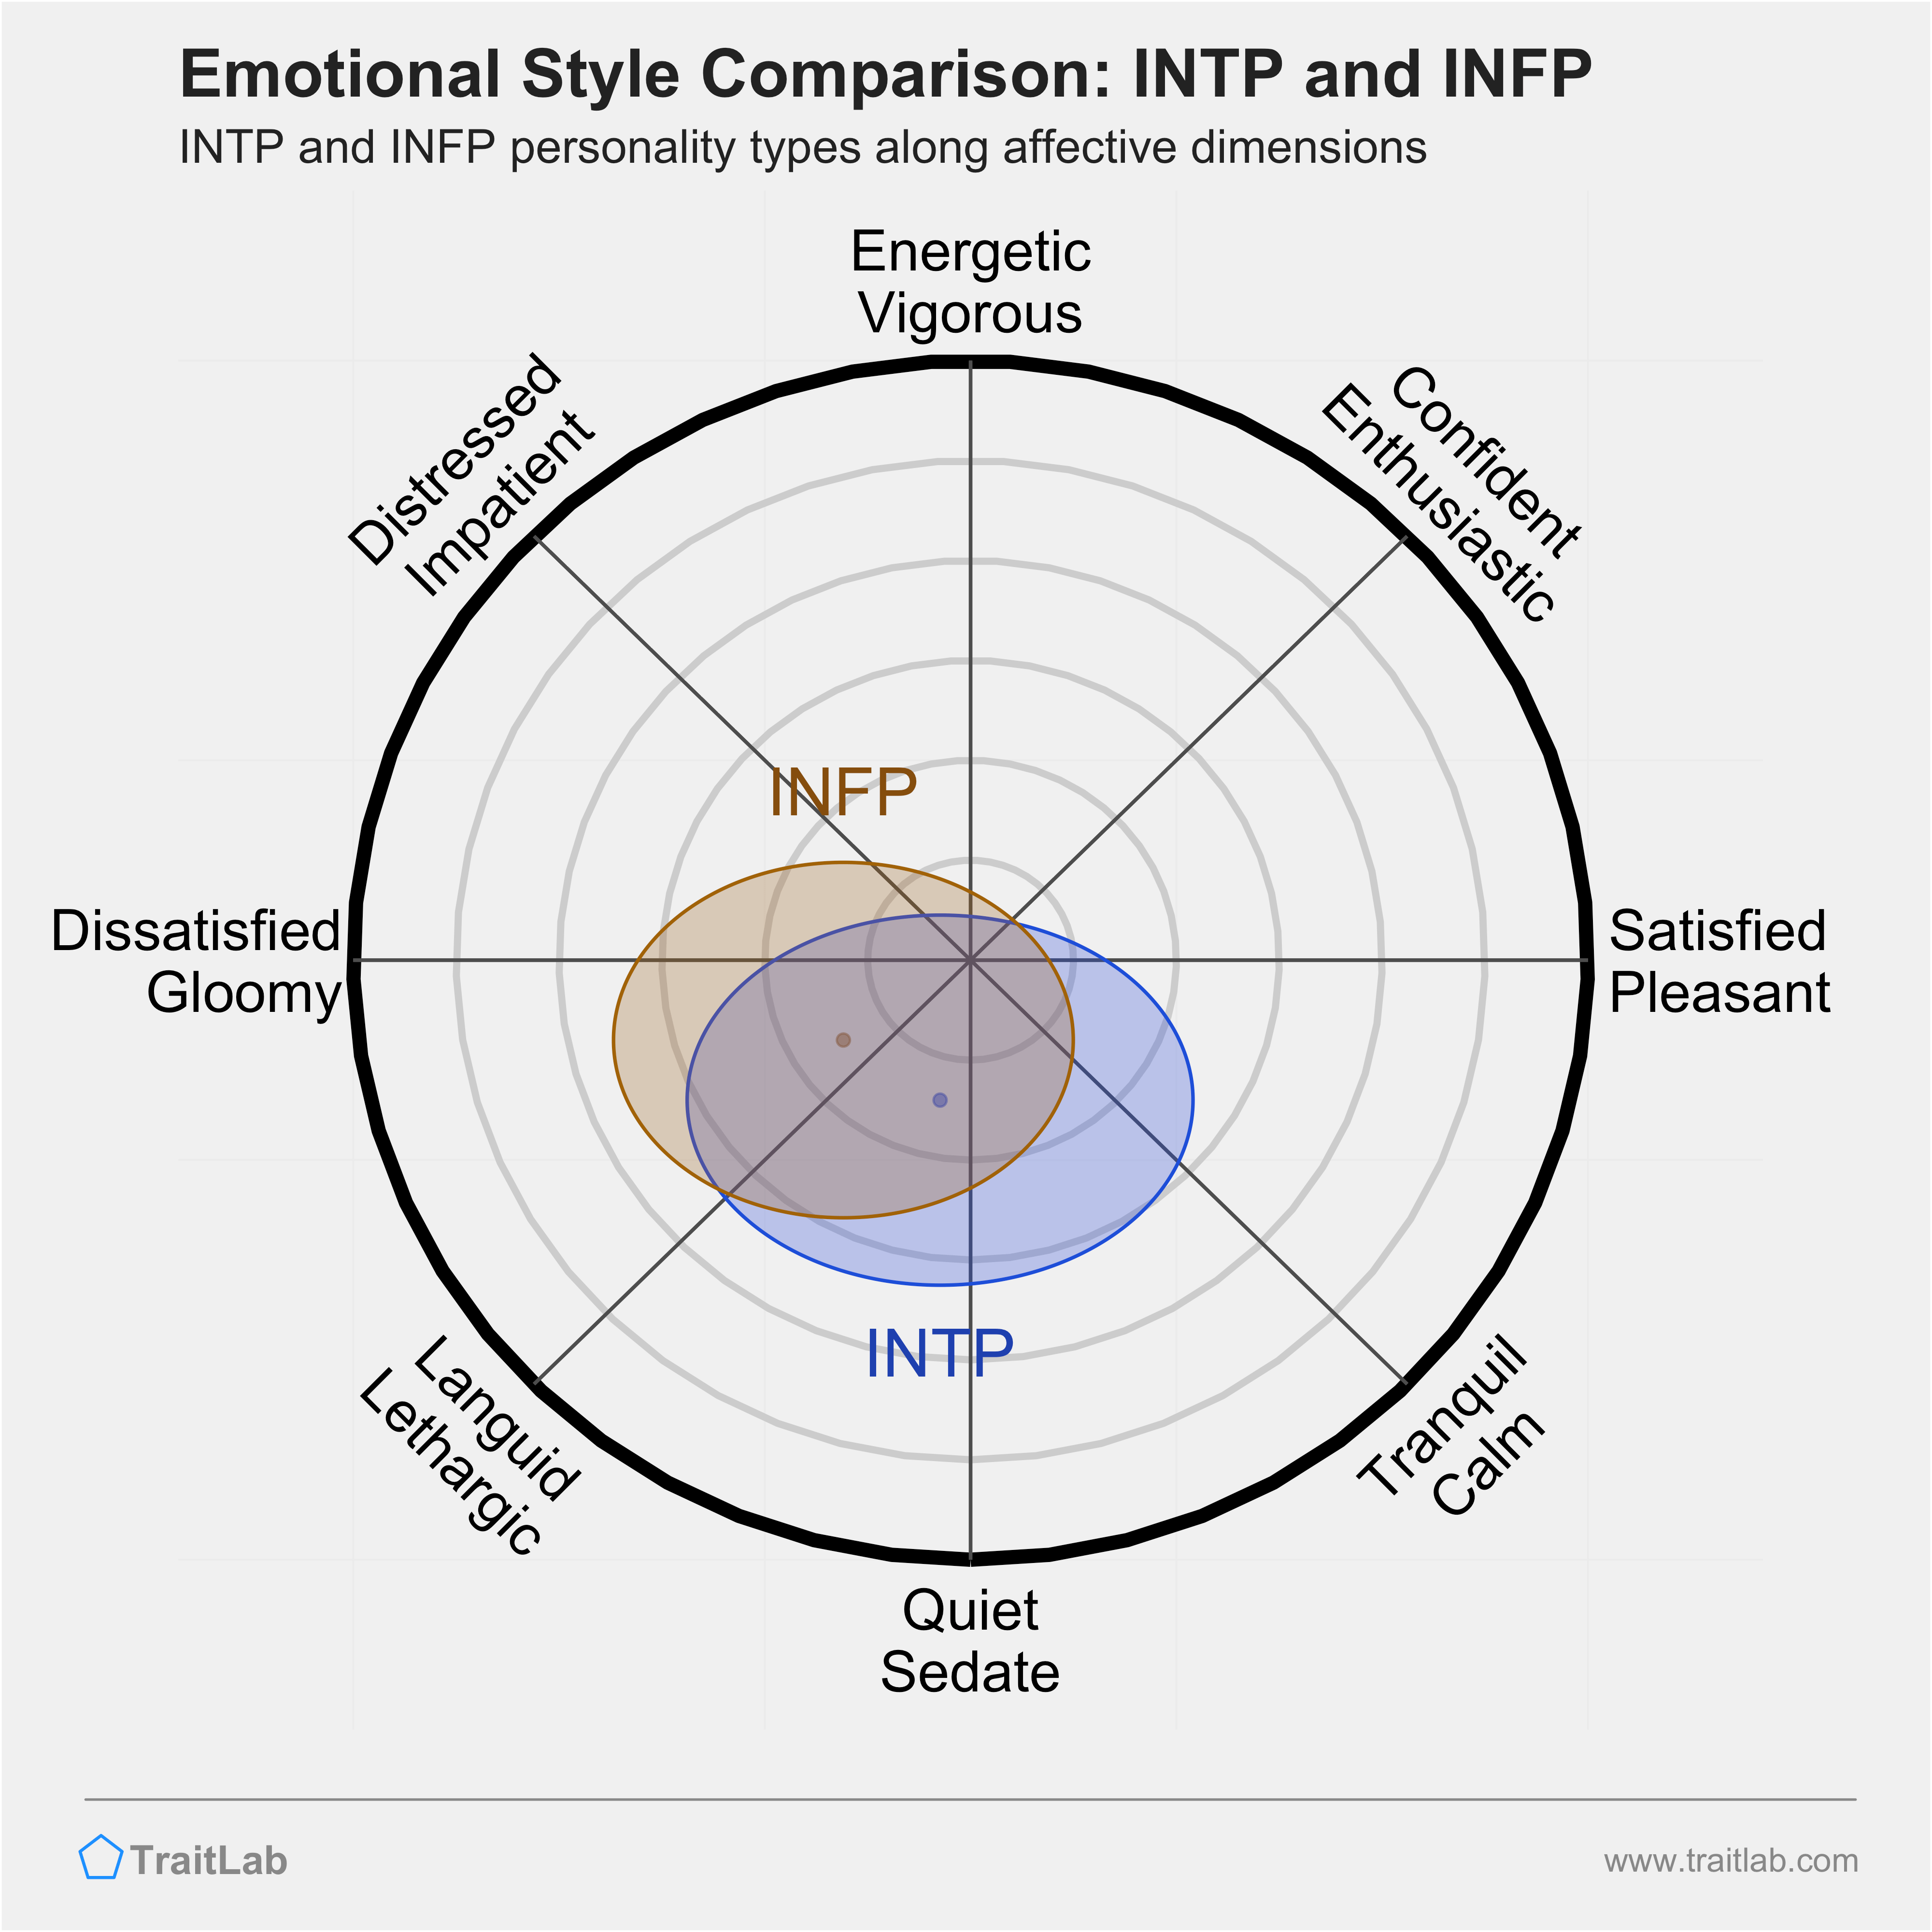 INTP and INFP comparison across emotional (affective) dimensions